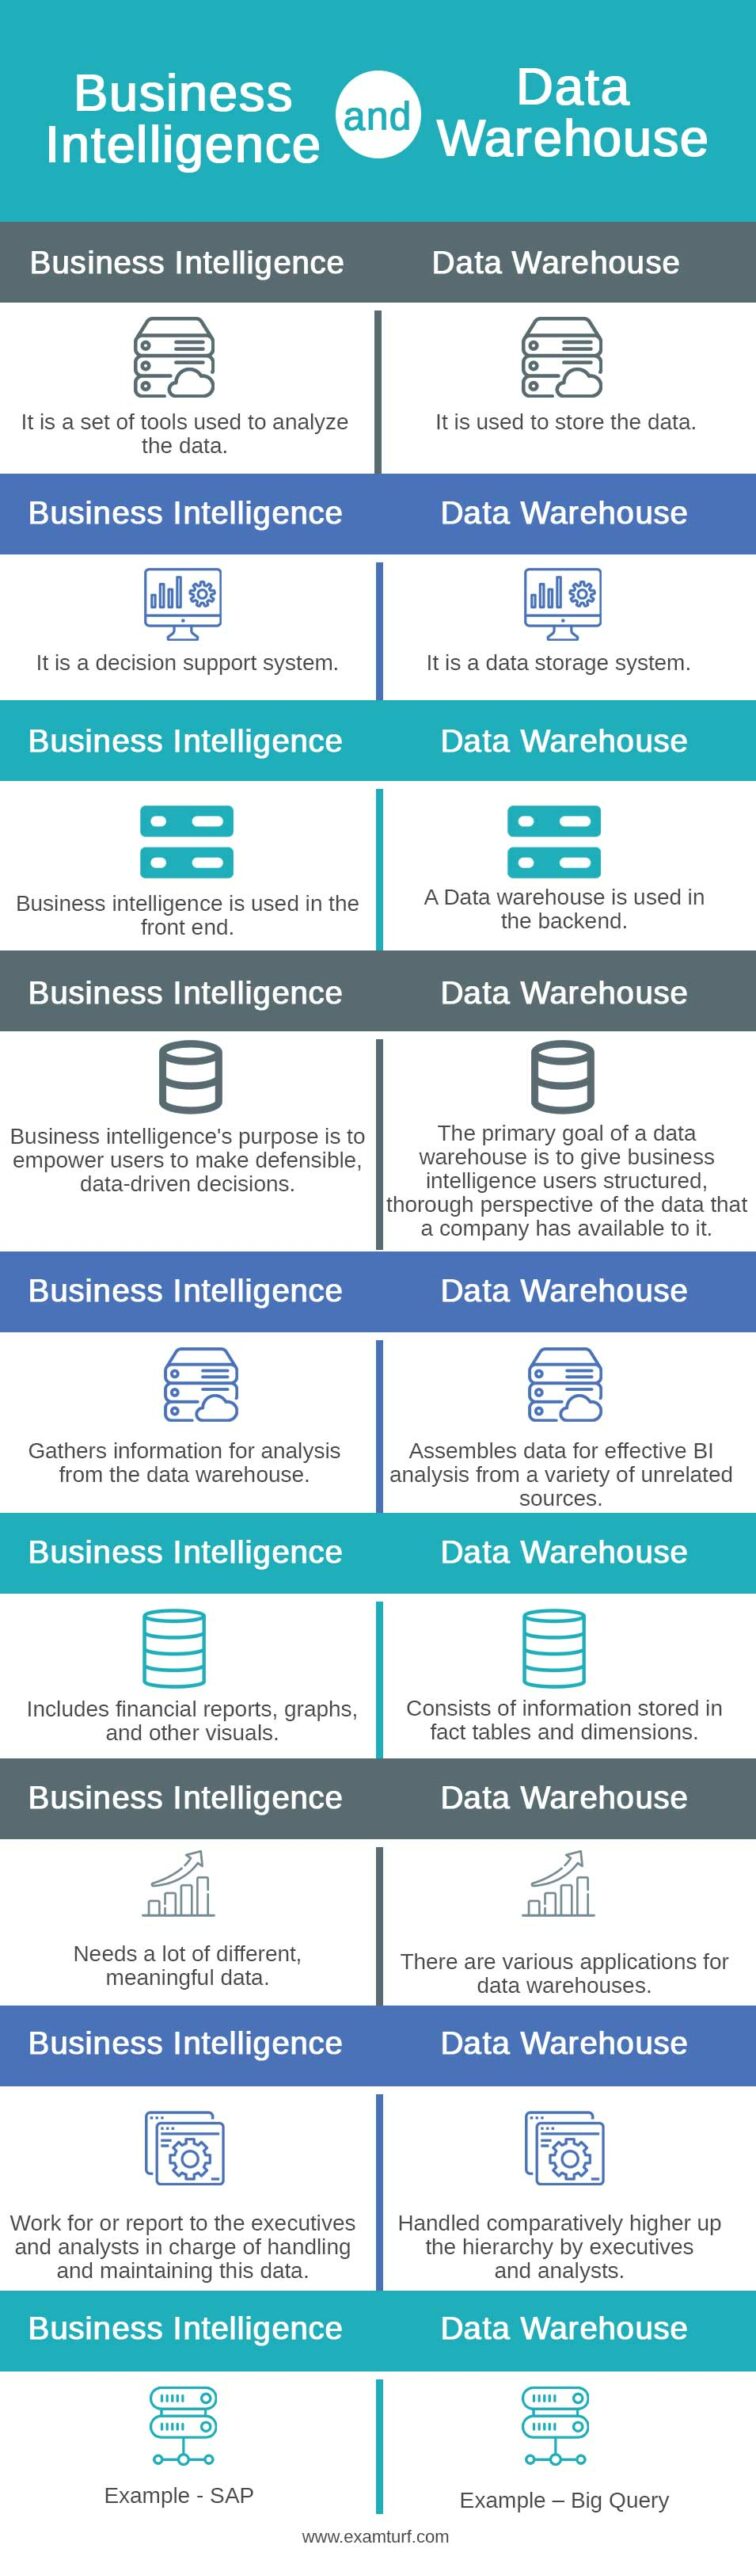 Business-Intelligence-and-Data-Warehouse-info